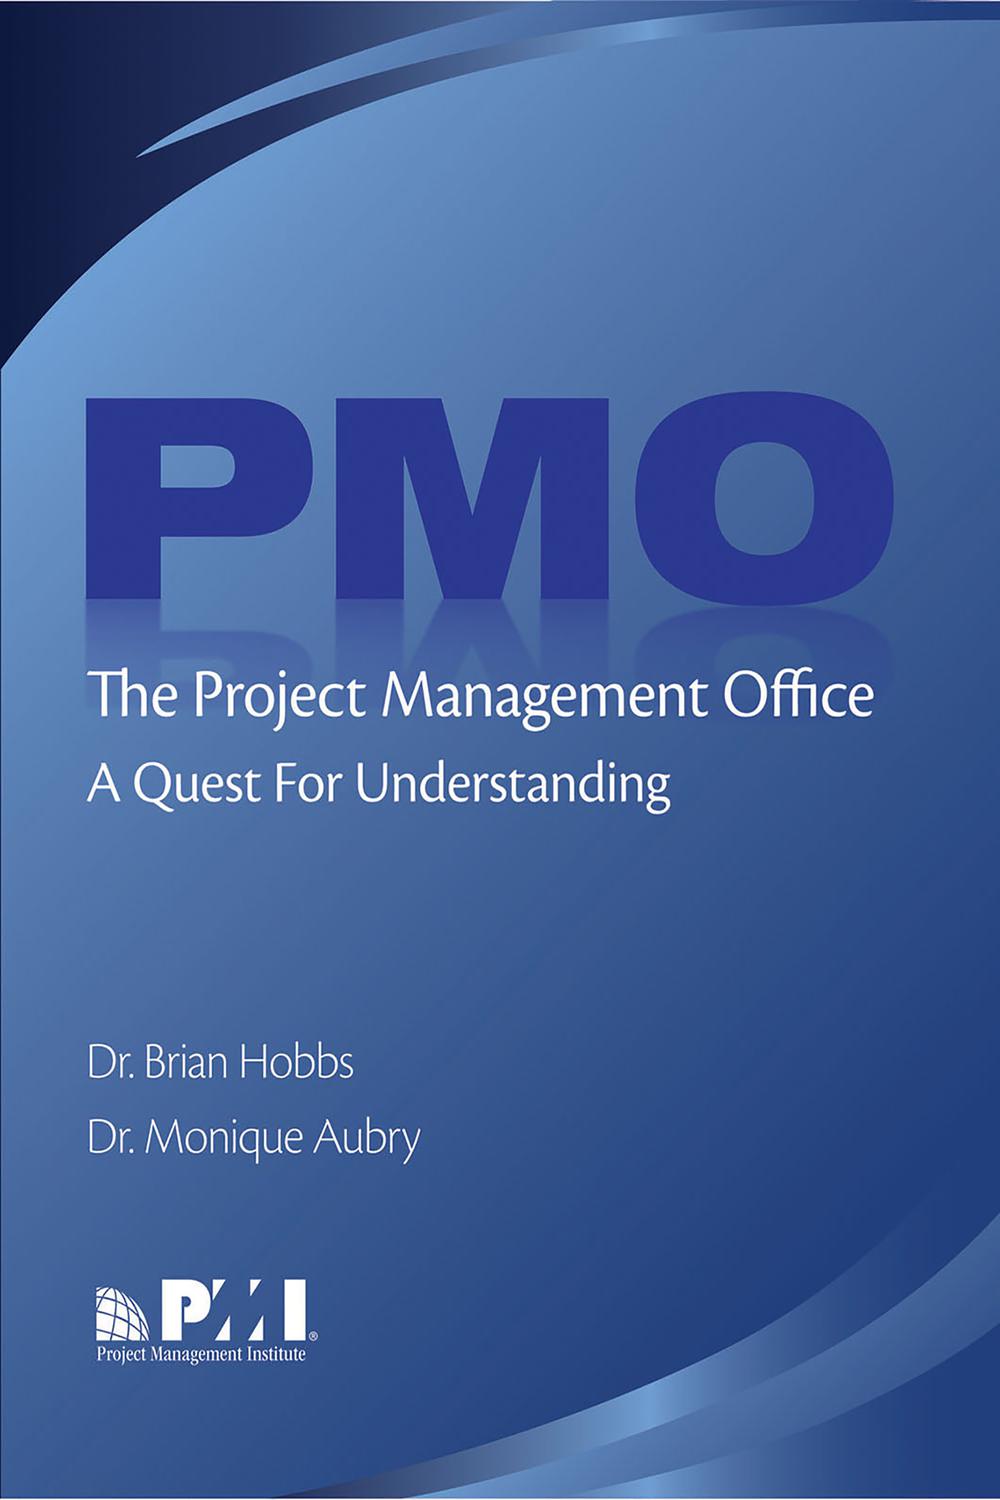 The Project Management Office (PMO) - Monique Aubry, PhD, MPM, Brian Hobbs